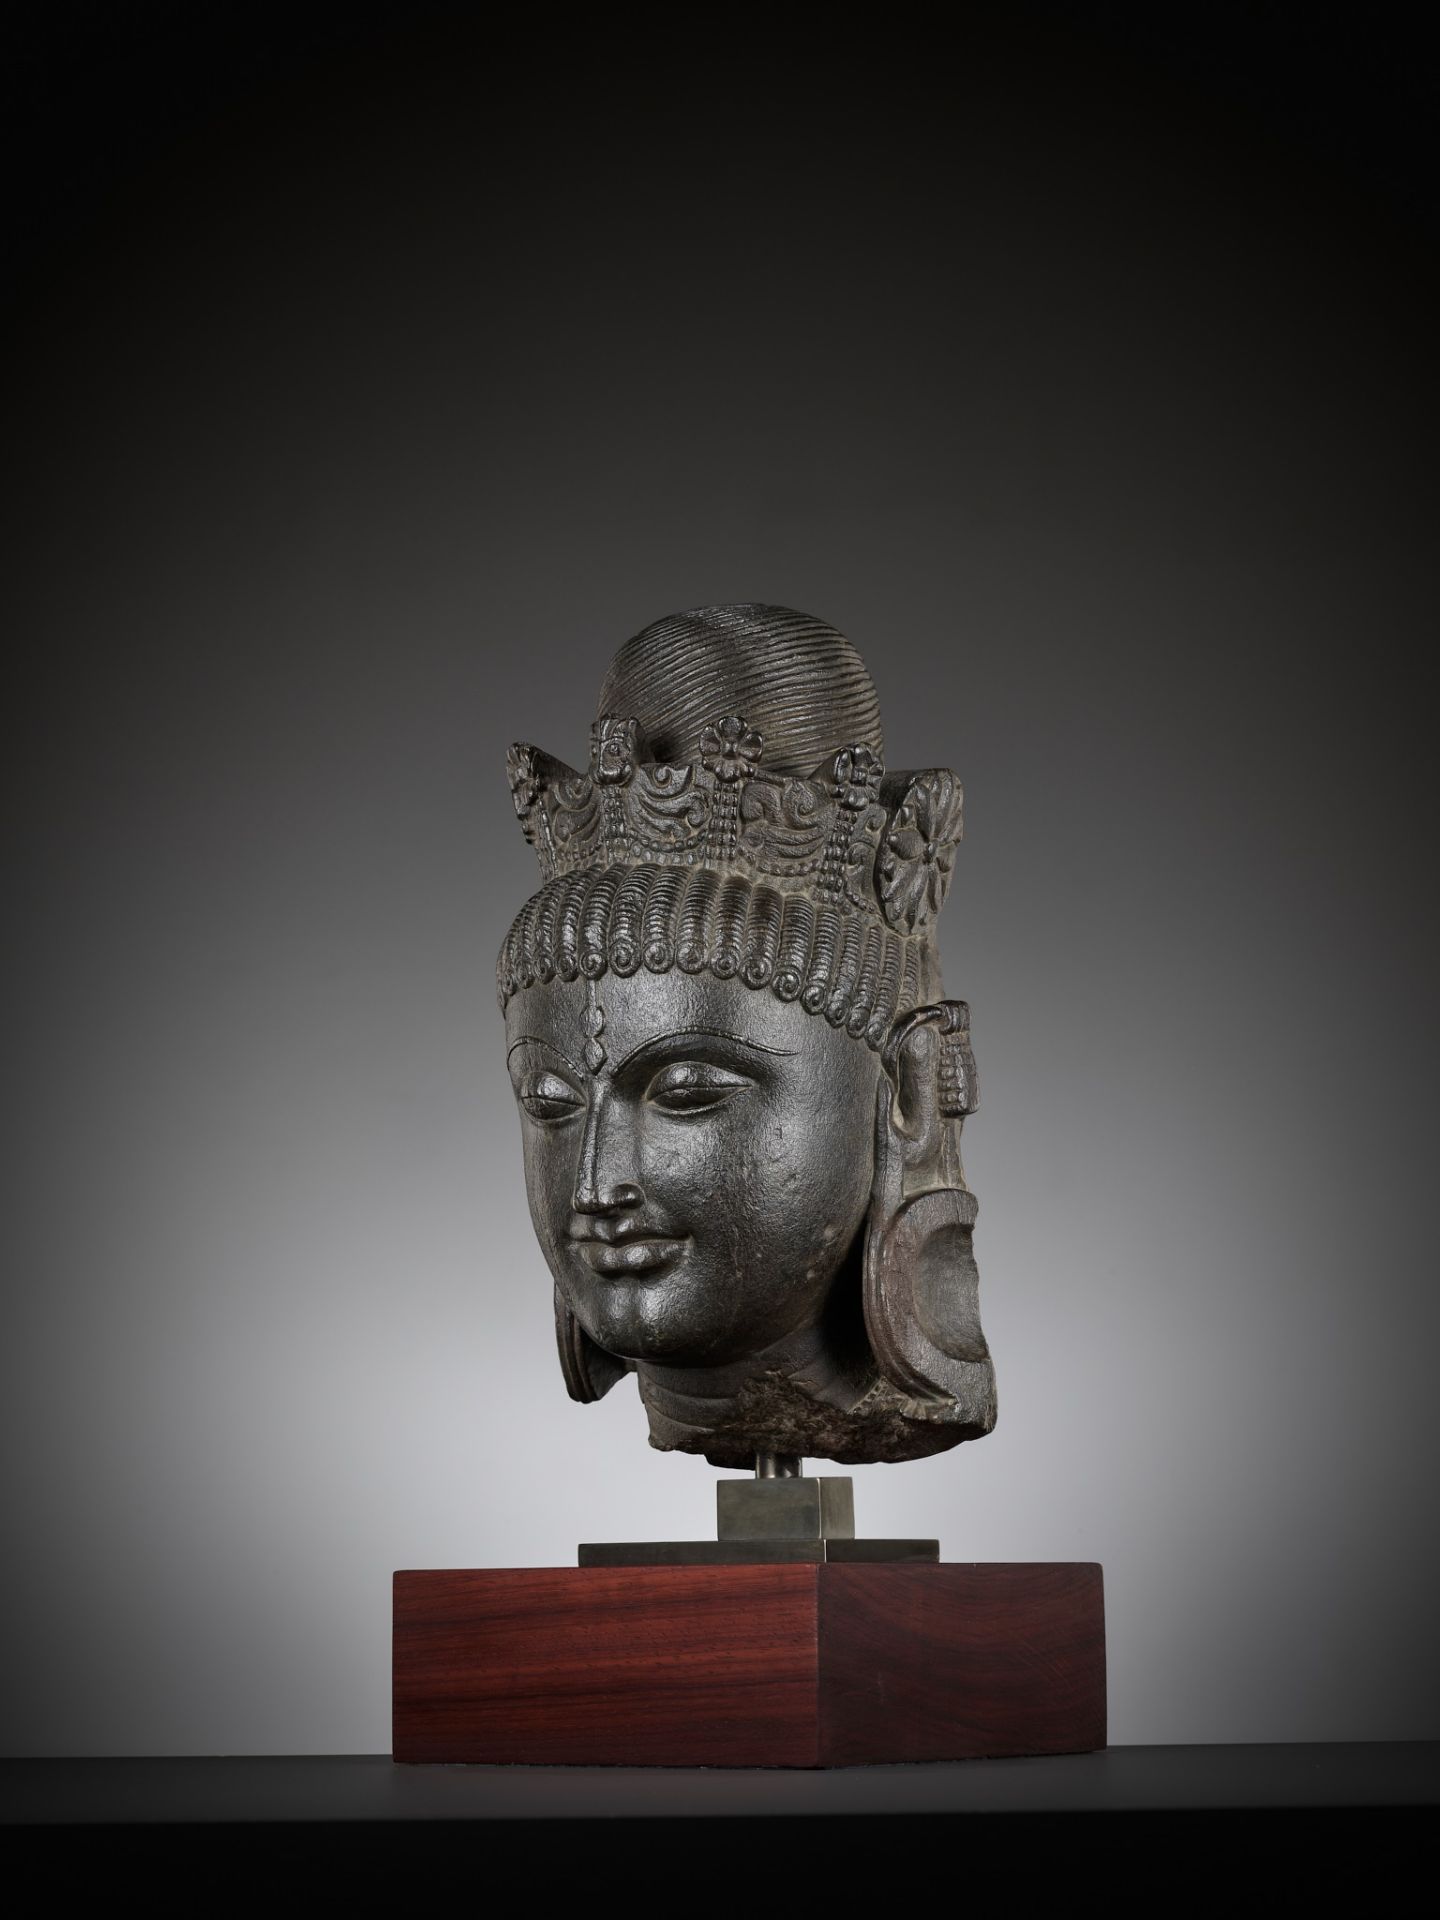 AN IMPORTANT AND MONUMENTAL BLACK STONE HEAD OF TARA, PALA PERIOD - Image 10 of 15